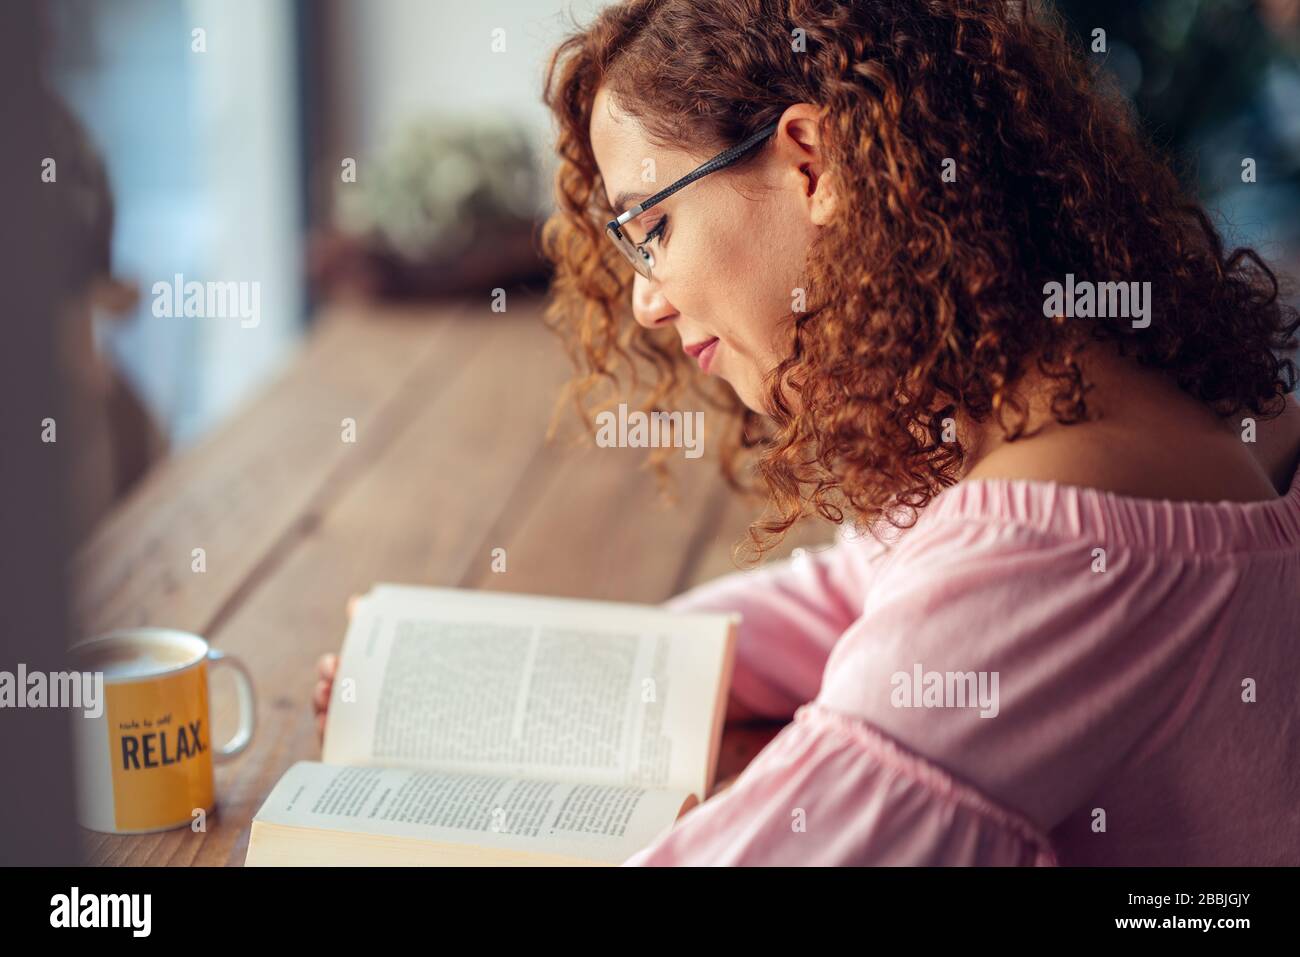 Young red hair woman with eyeglasses is sitting and reading a book. Stock Photo